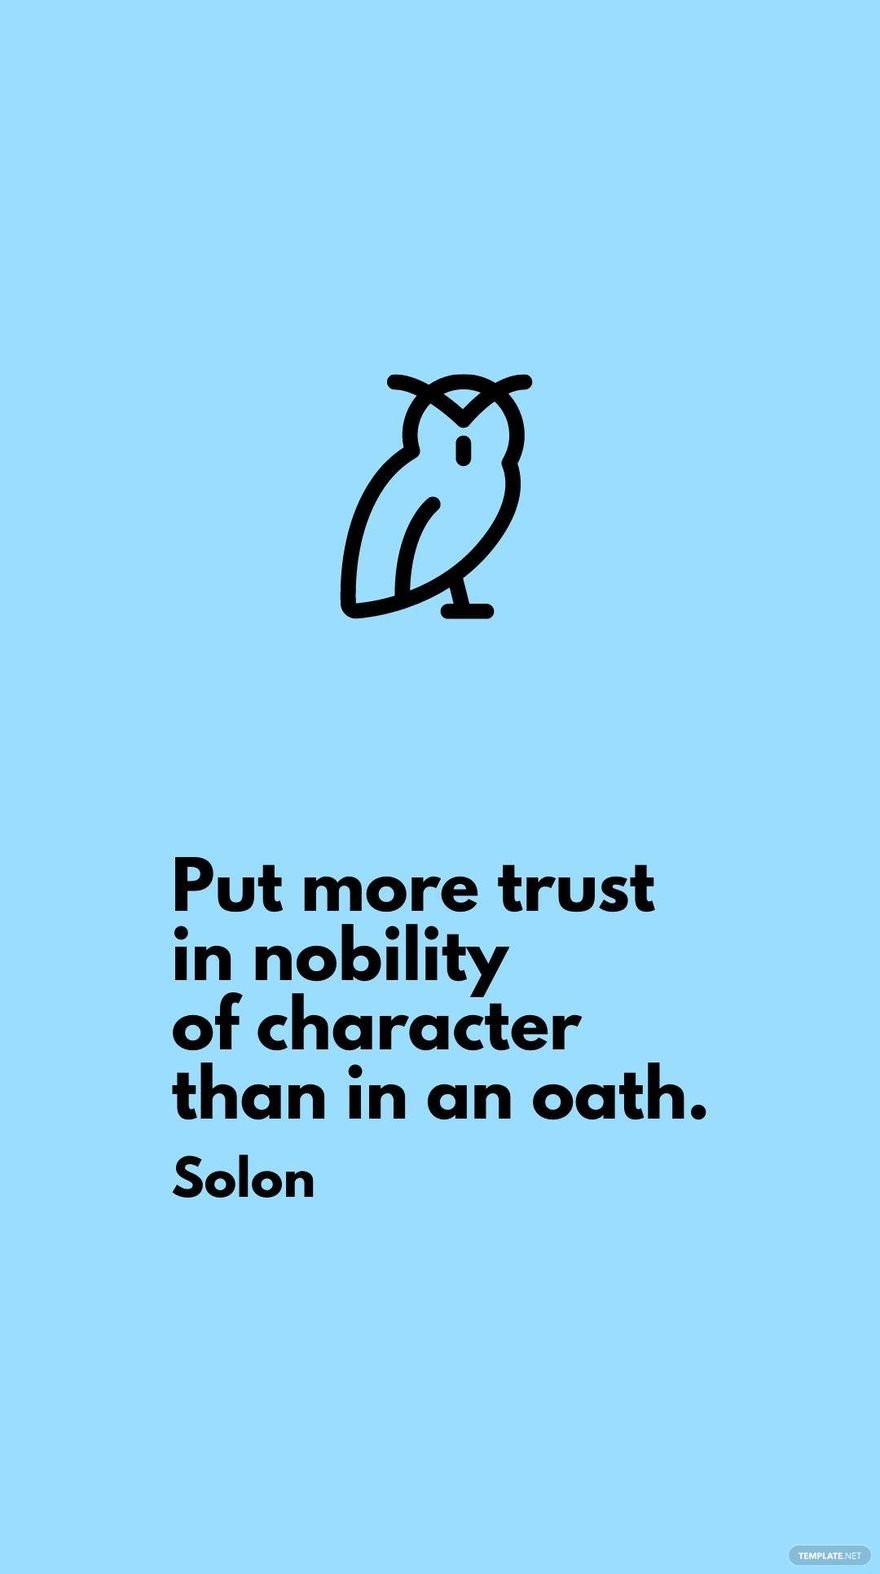 Free Solon - Put more trust in nobility of character than in an oath. in JPG